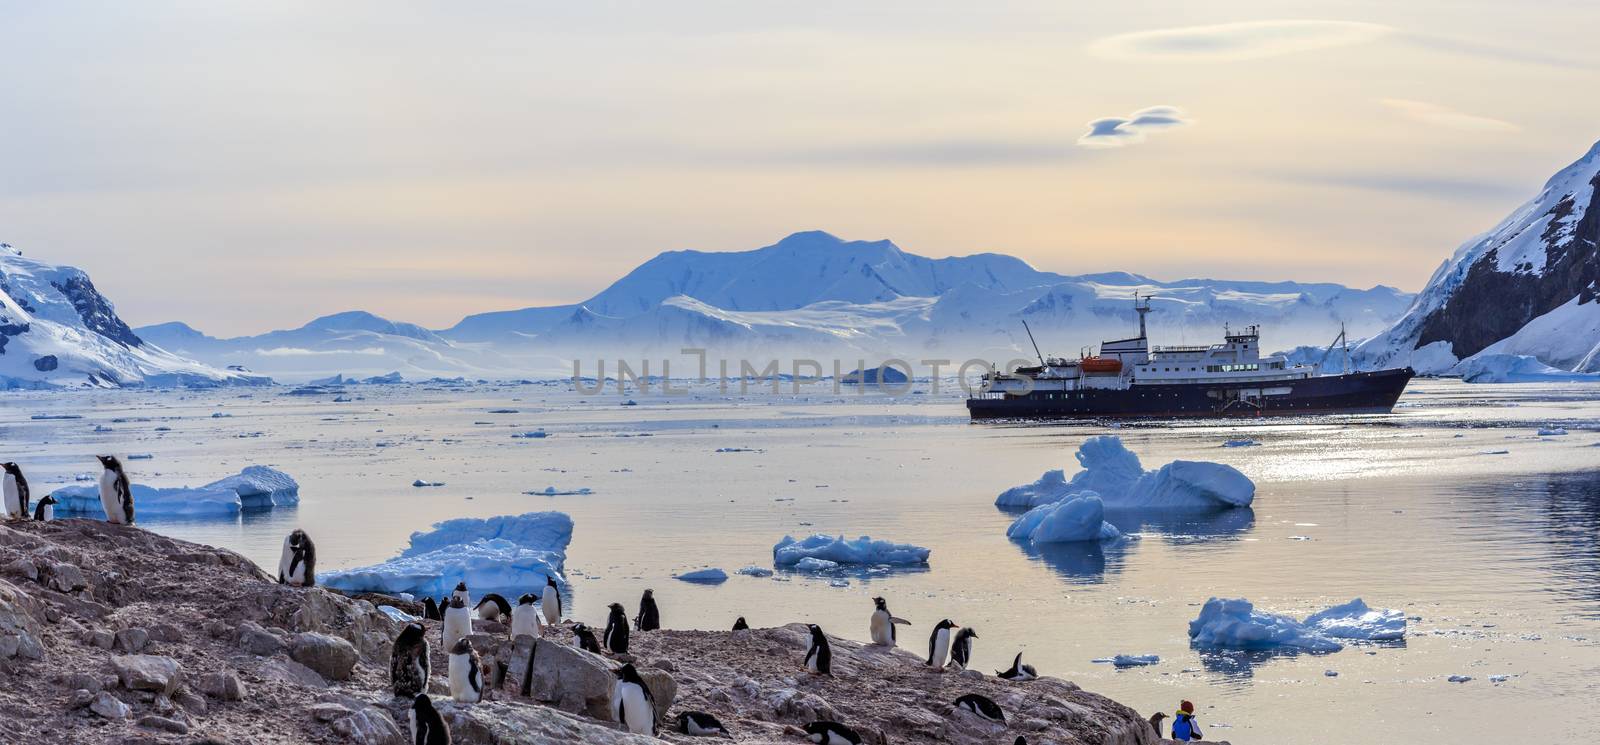 Antarctic cruise ship among icebergs and Gentoo penguins gathere by ambeon